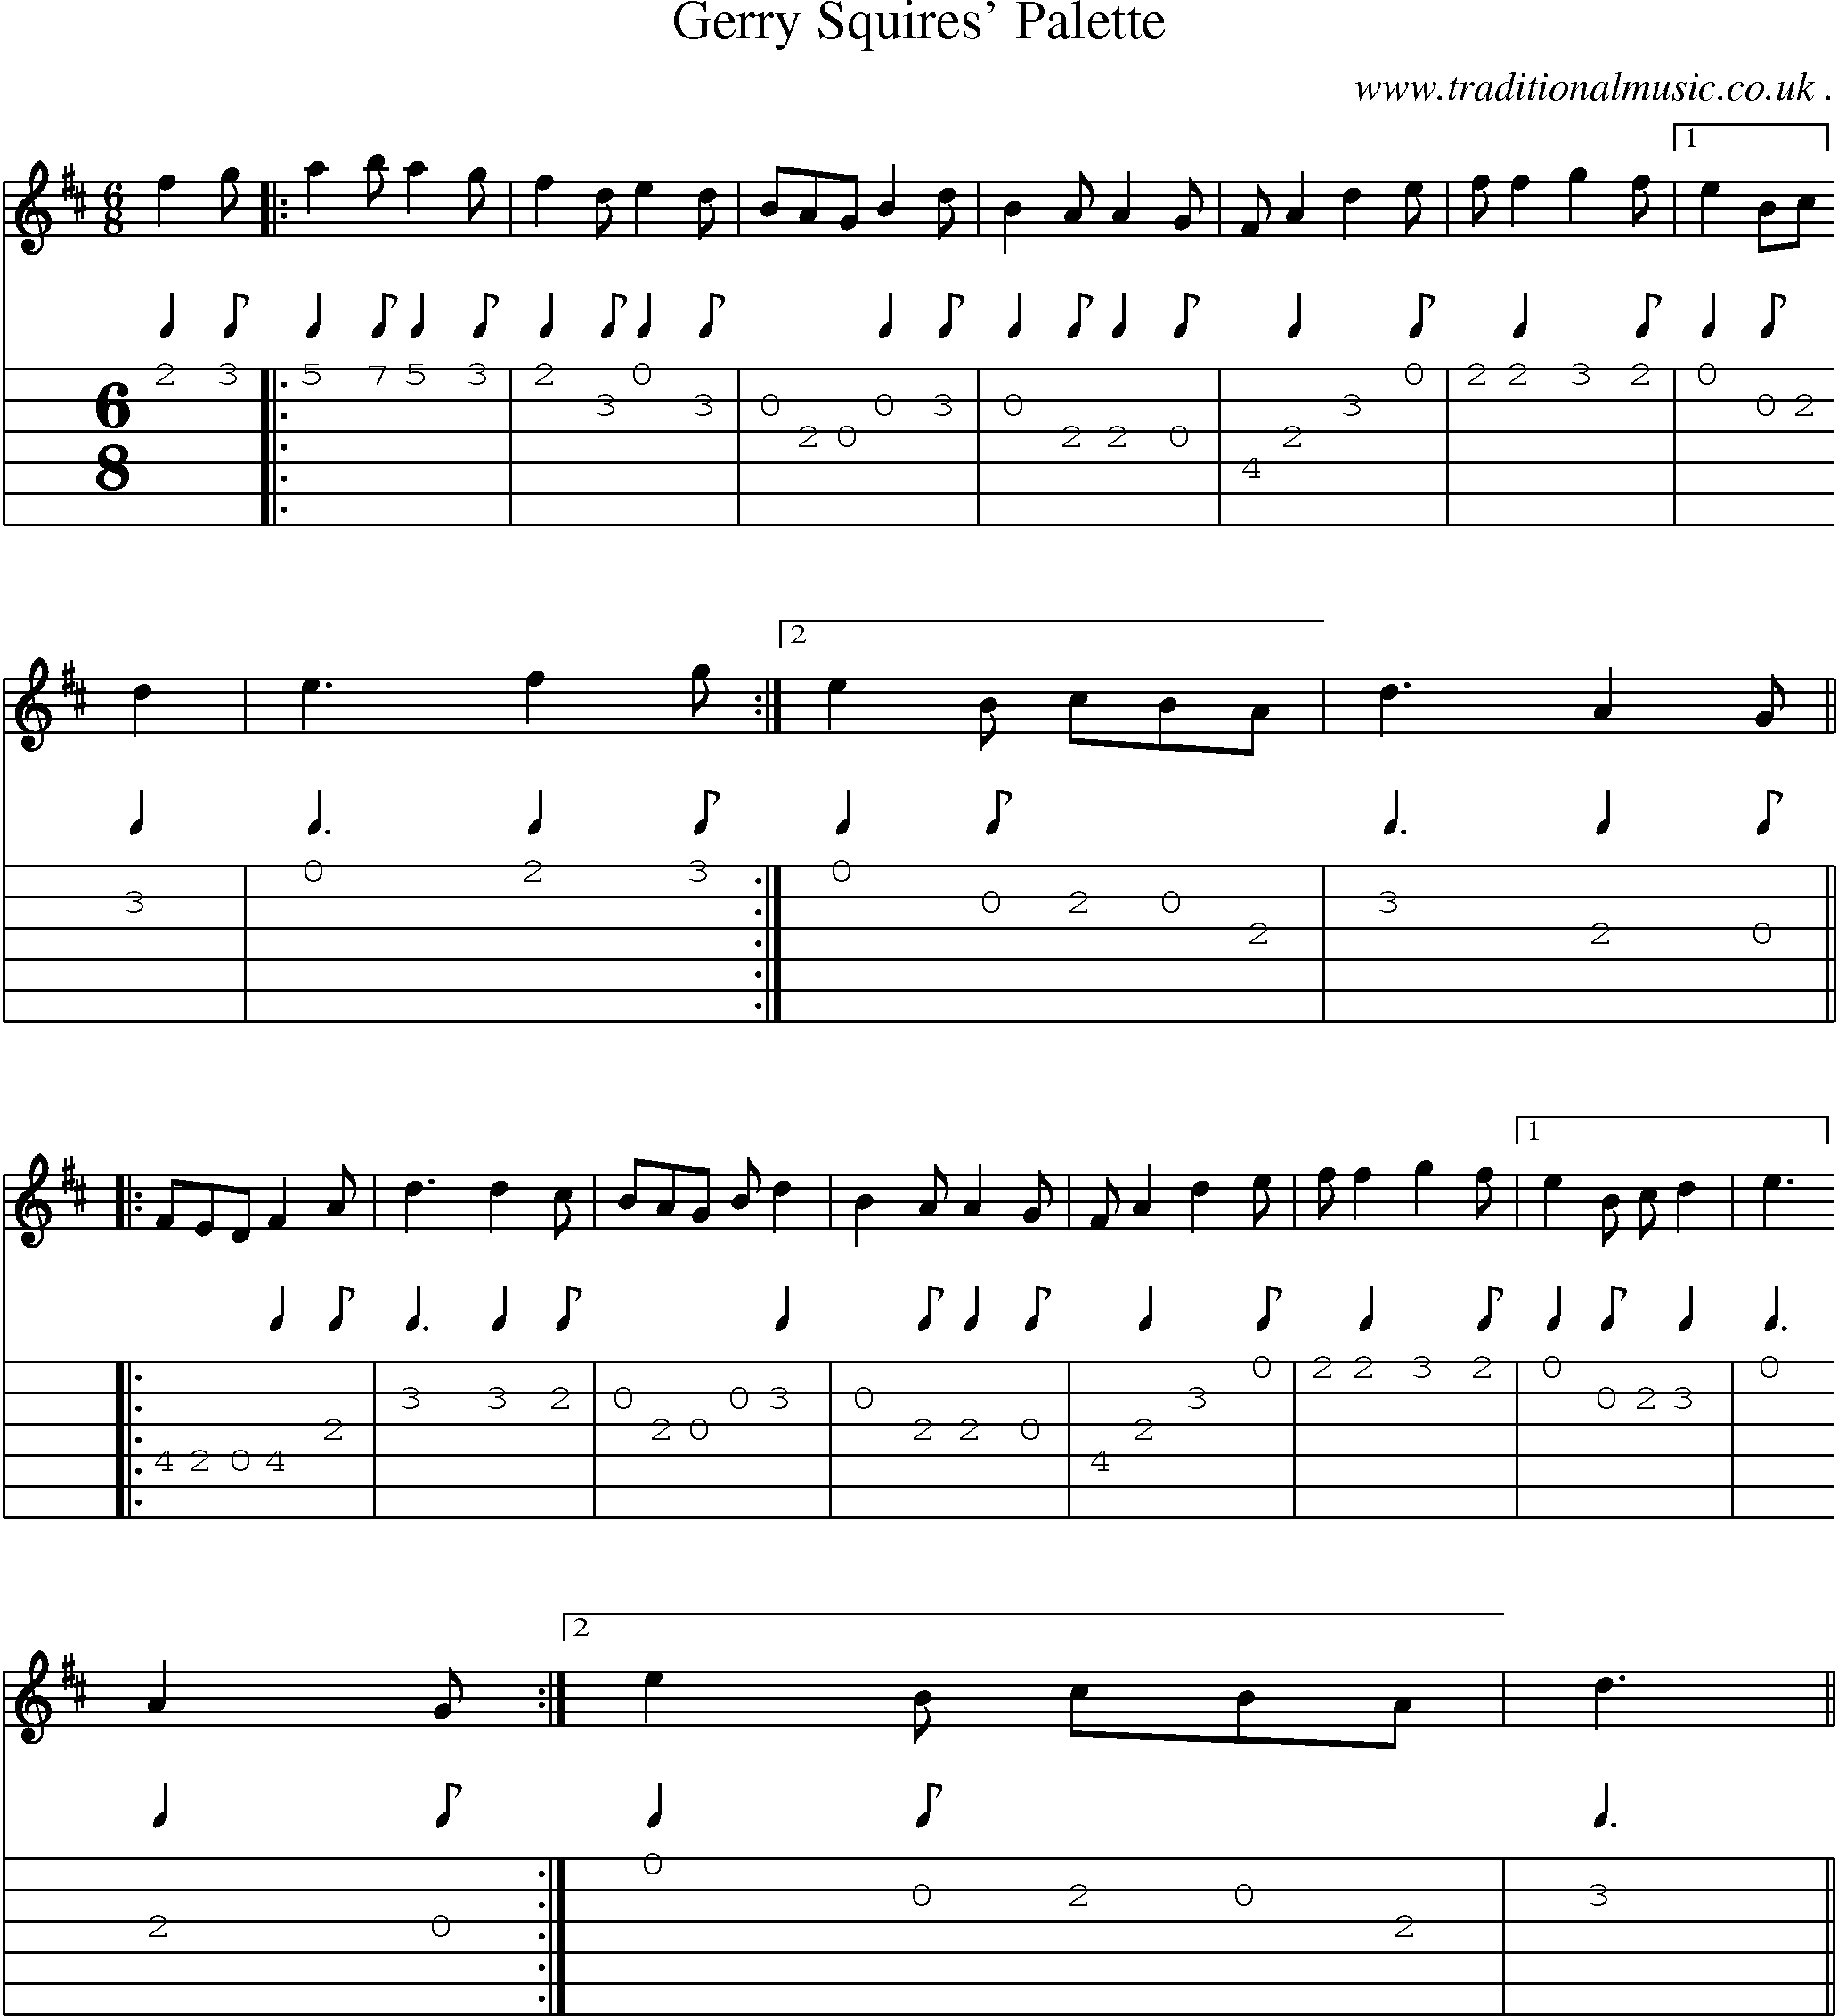 Sheet-Music and Guitar Tabs for Gerry Squires Palette